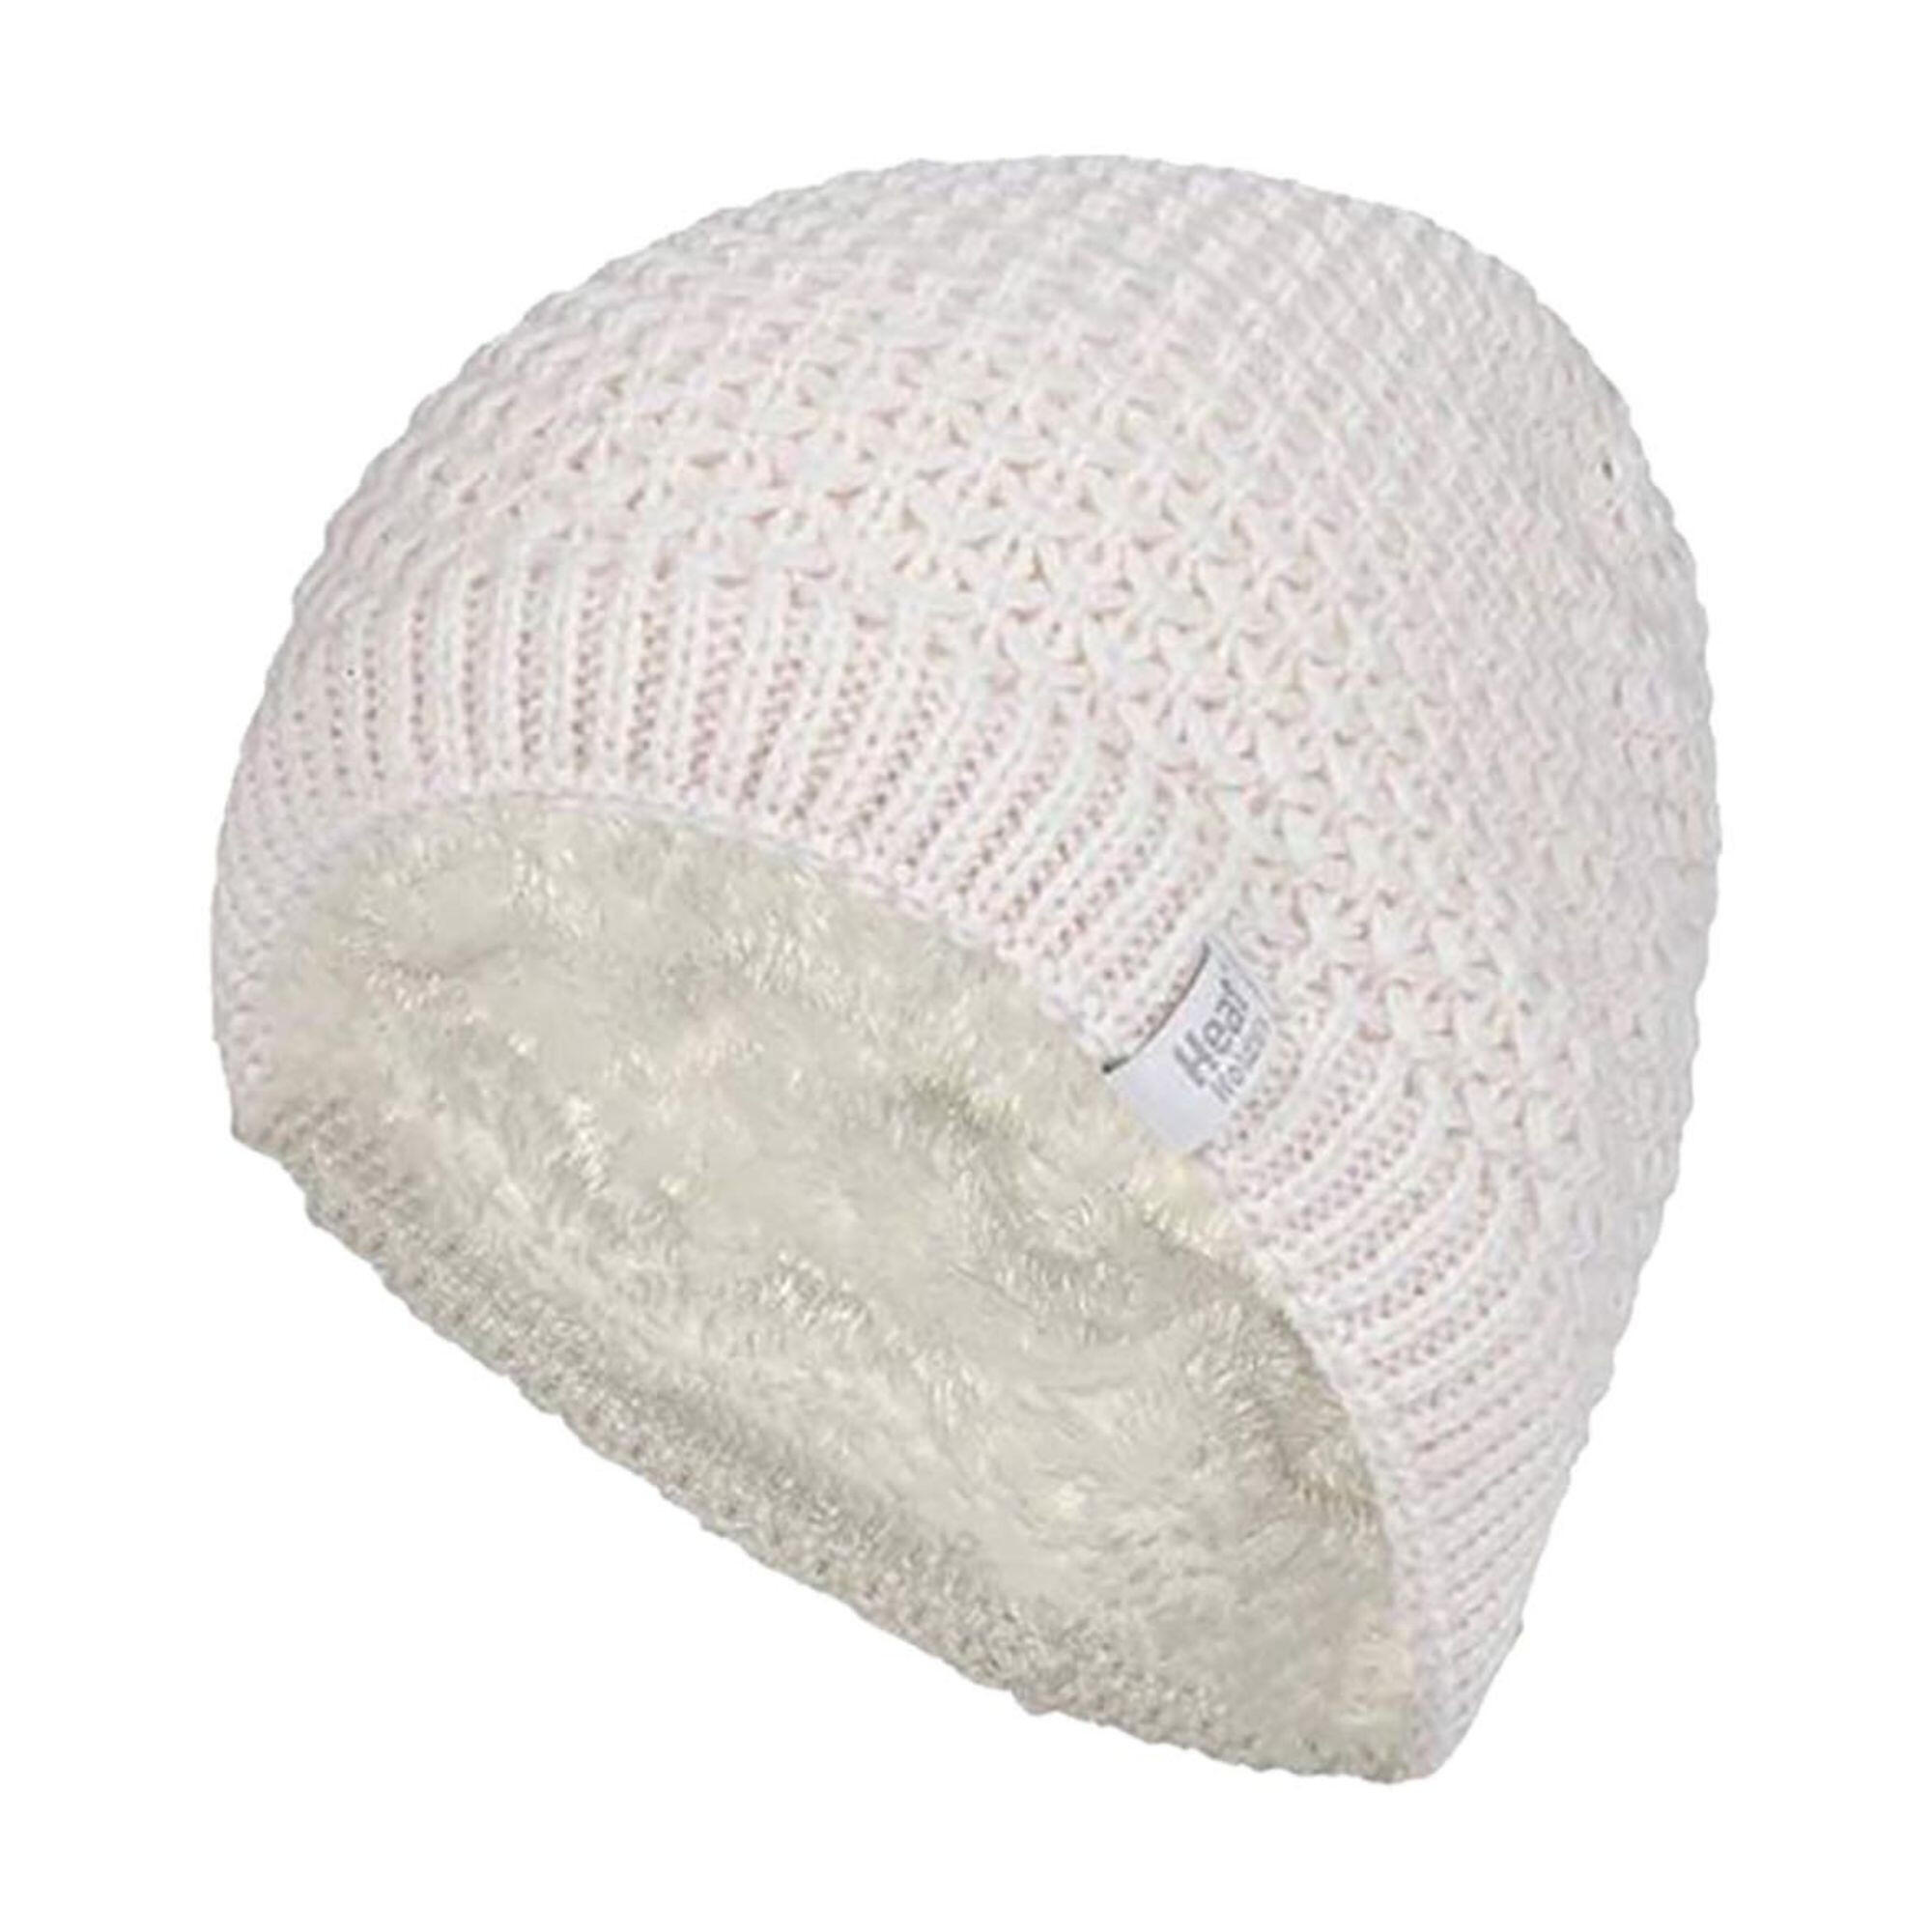 Ladies Knit Fleece Lined Warm Thermal Beanie Hat 1/4